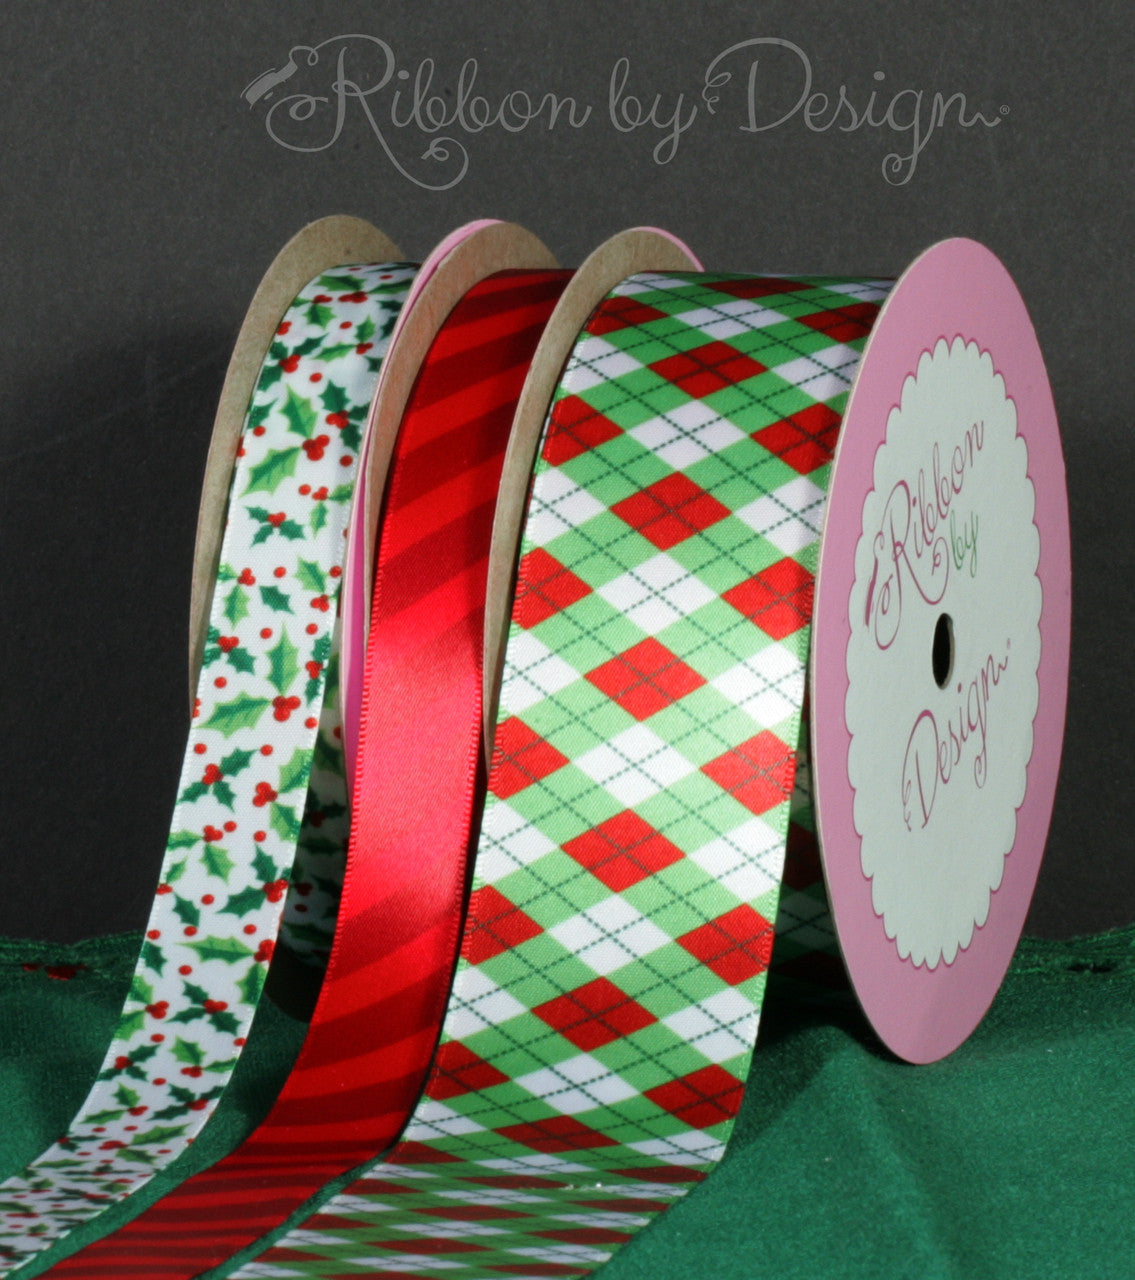 Mix and match our red and green ribbons to create a beautiful table scape, floral arrangement or wreath for your Holiday home decor!